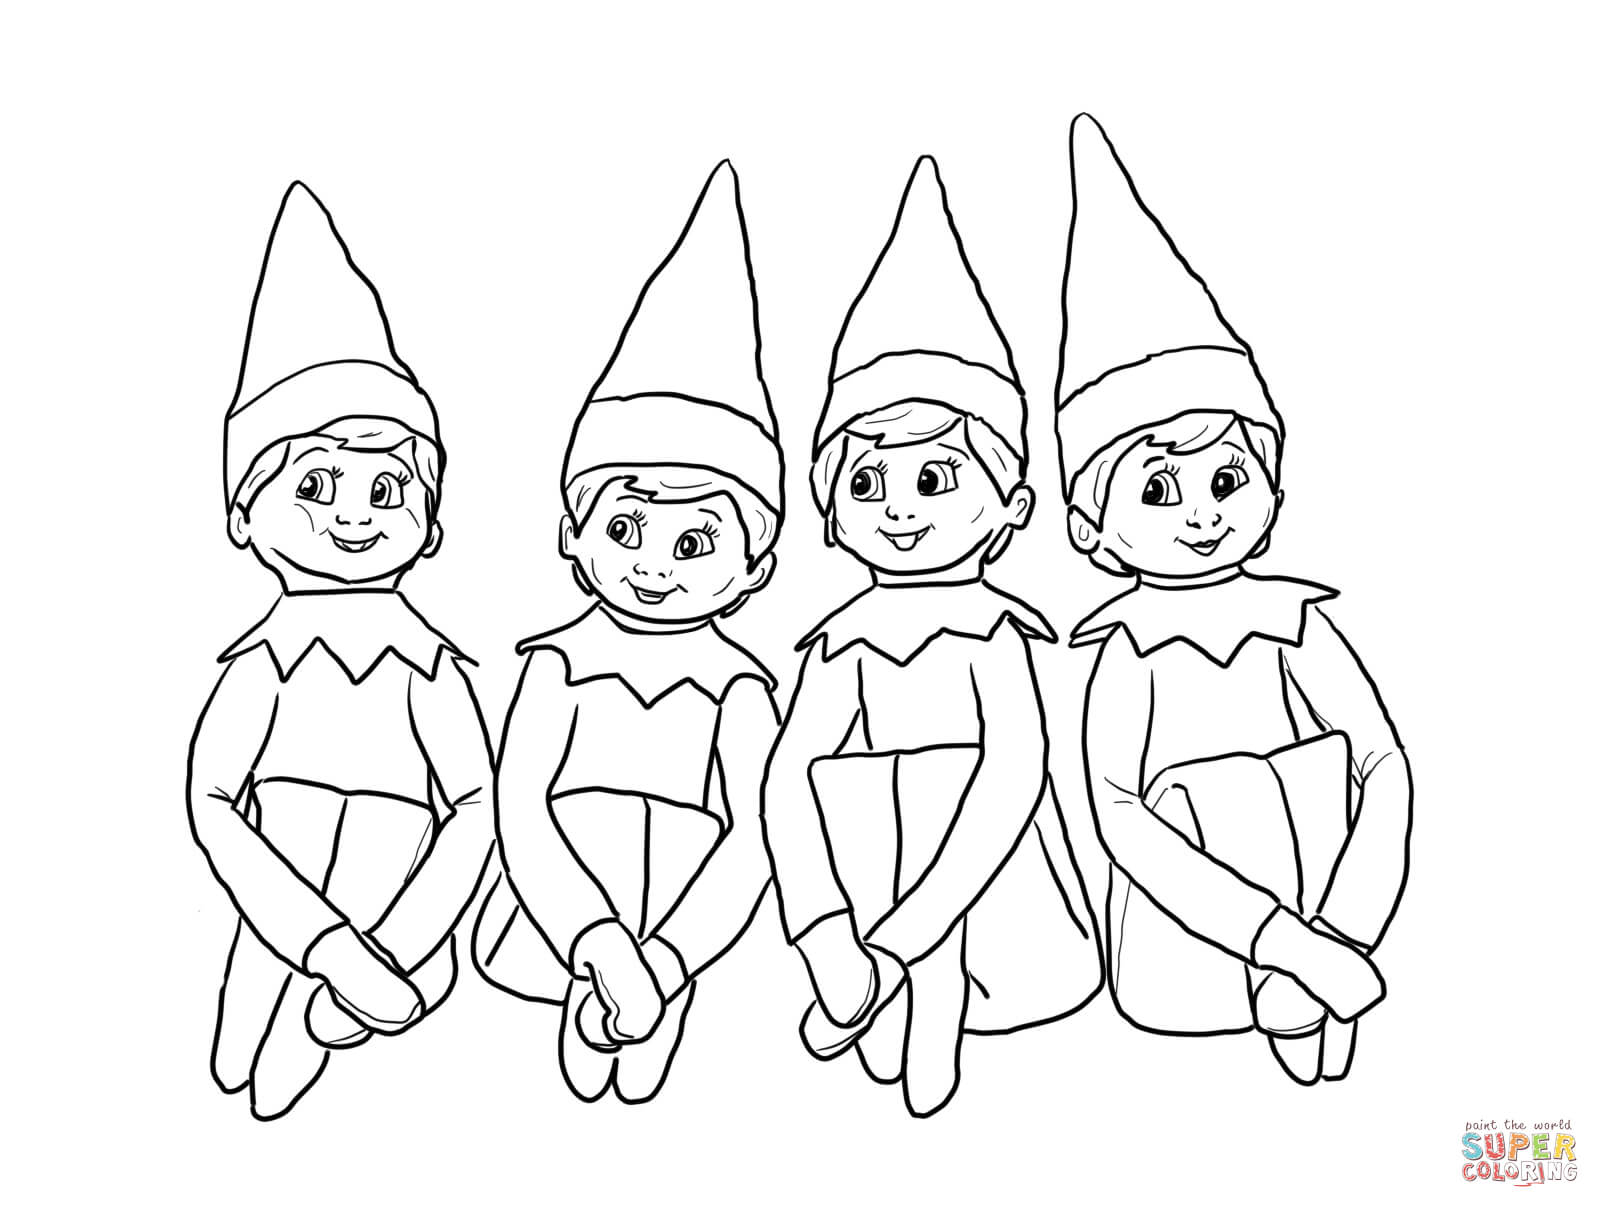 Christmas Coloring Pages Boy Elf On The Shelf   Coloring Pages For ...